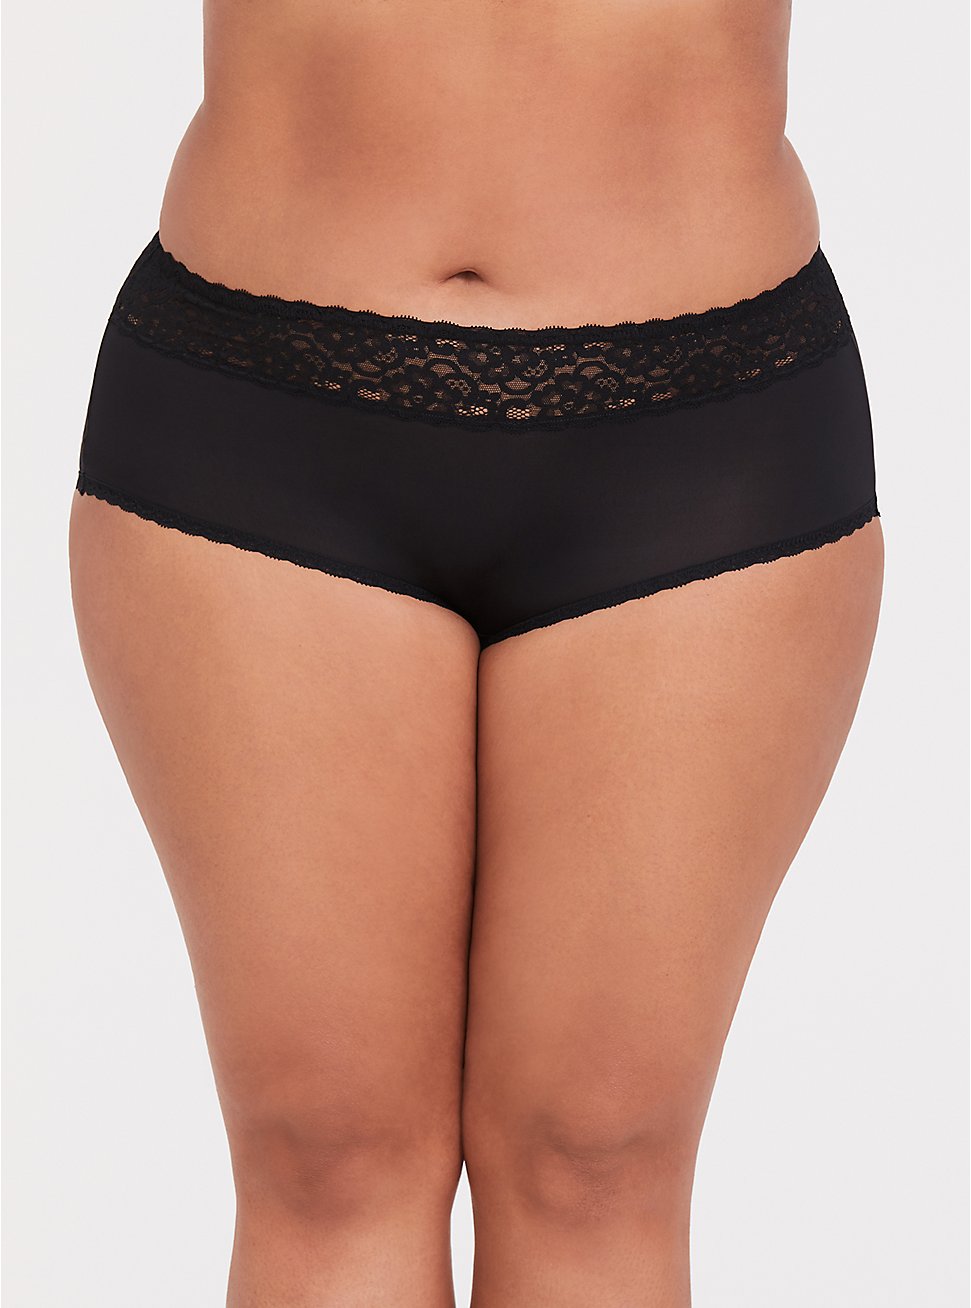 Second Skin Mid-Rise Hipster Lace Trim Panty, RICH BLACK, hi-res